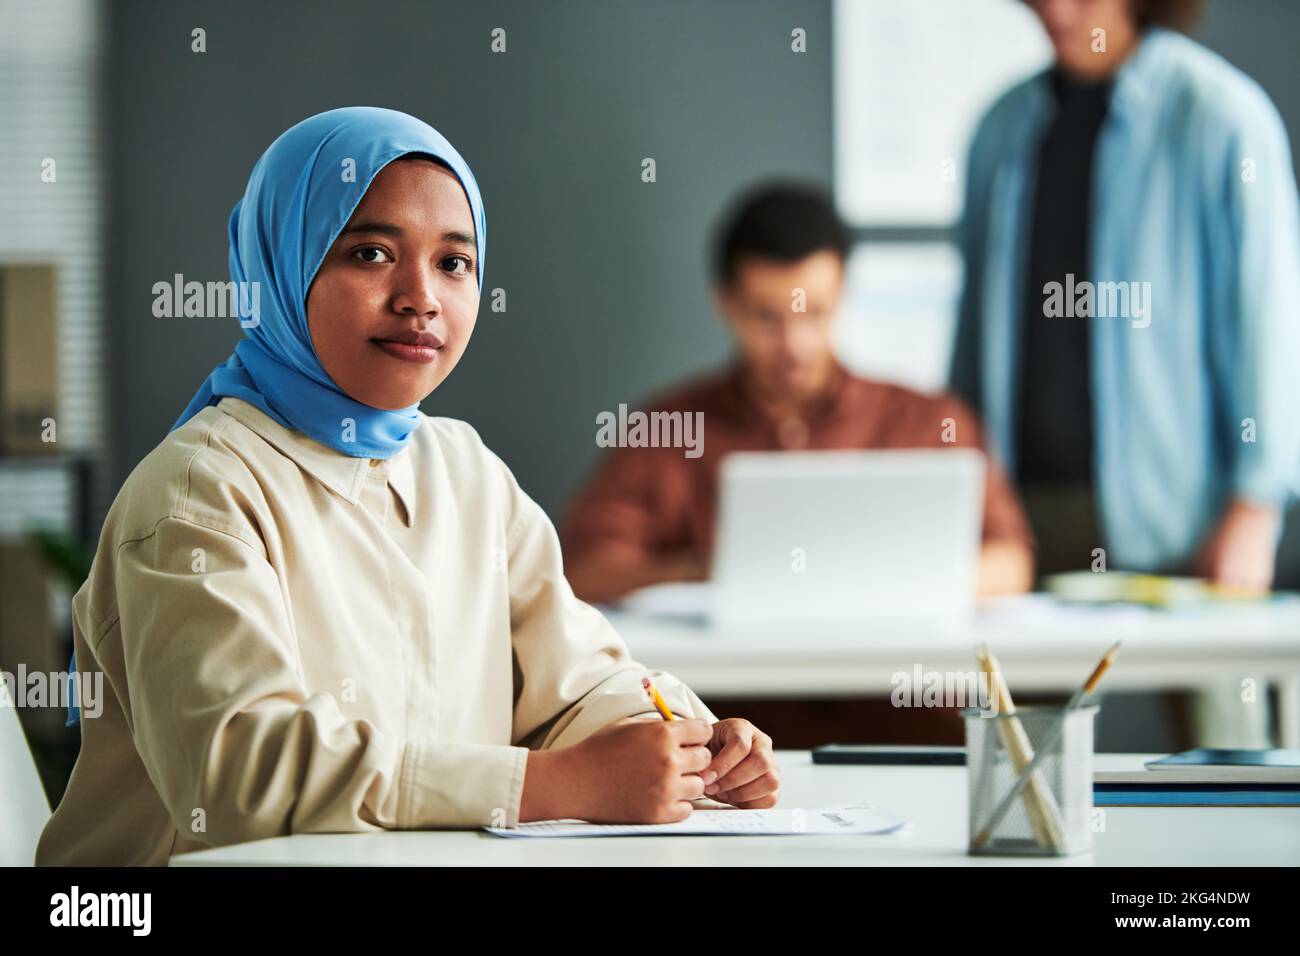 Young Muslim woman in blue hijab looking at camera while lchecking or carrying out grammar test by workplace against two guys Stock Photo